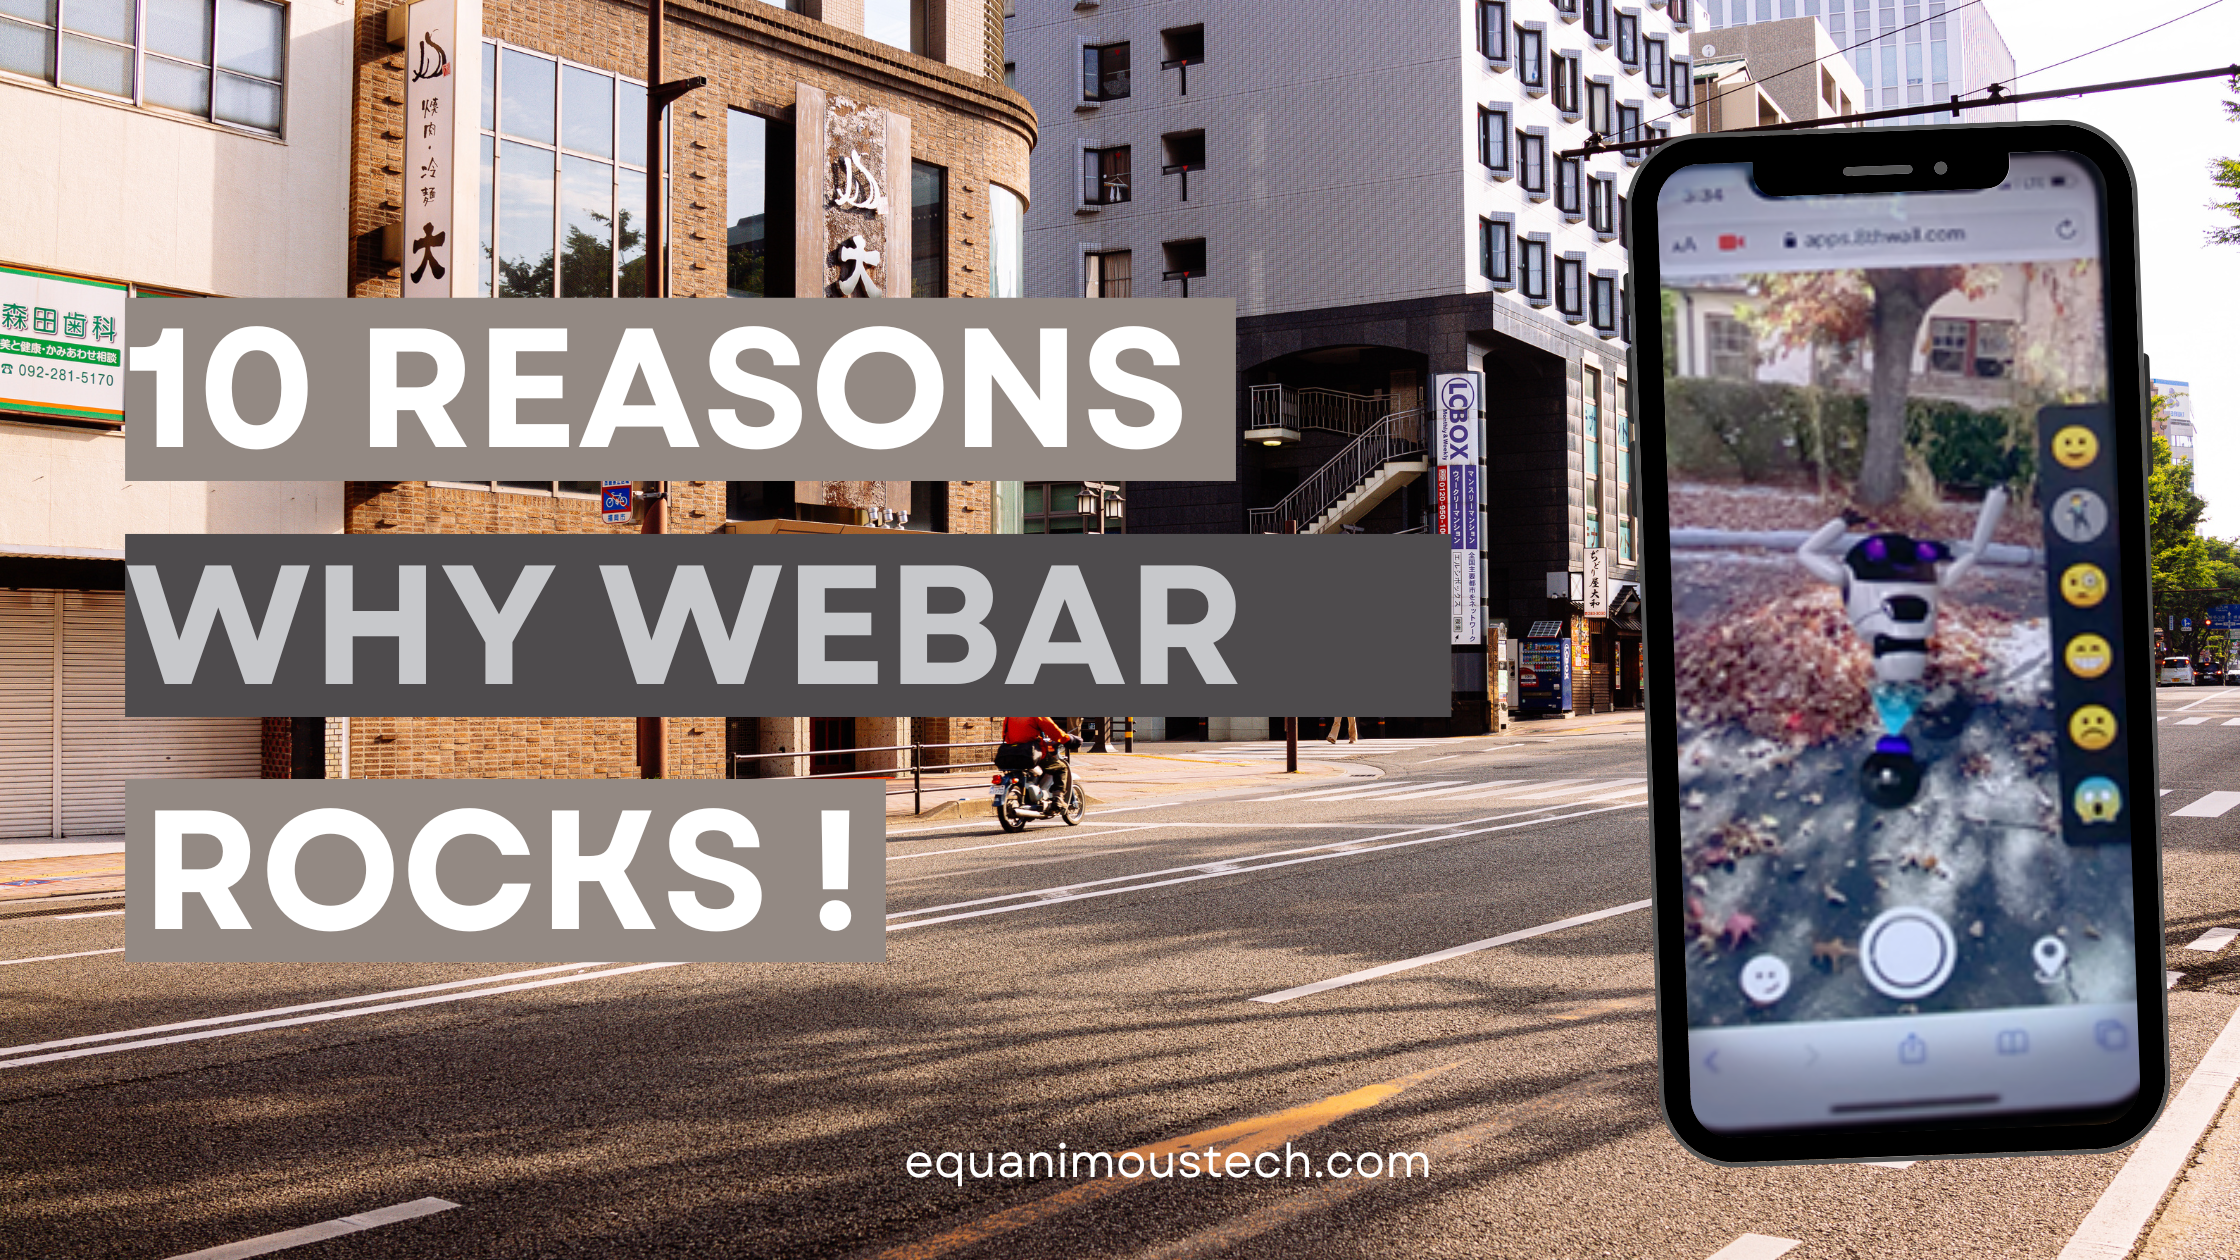 10 reasons why you must use WebAR tech today for marketing